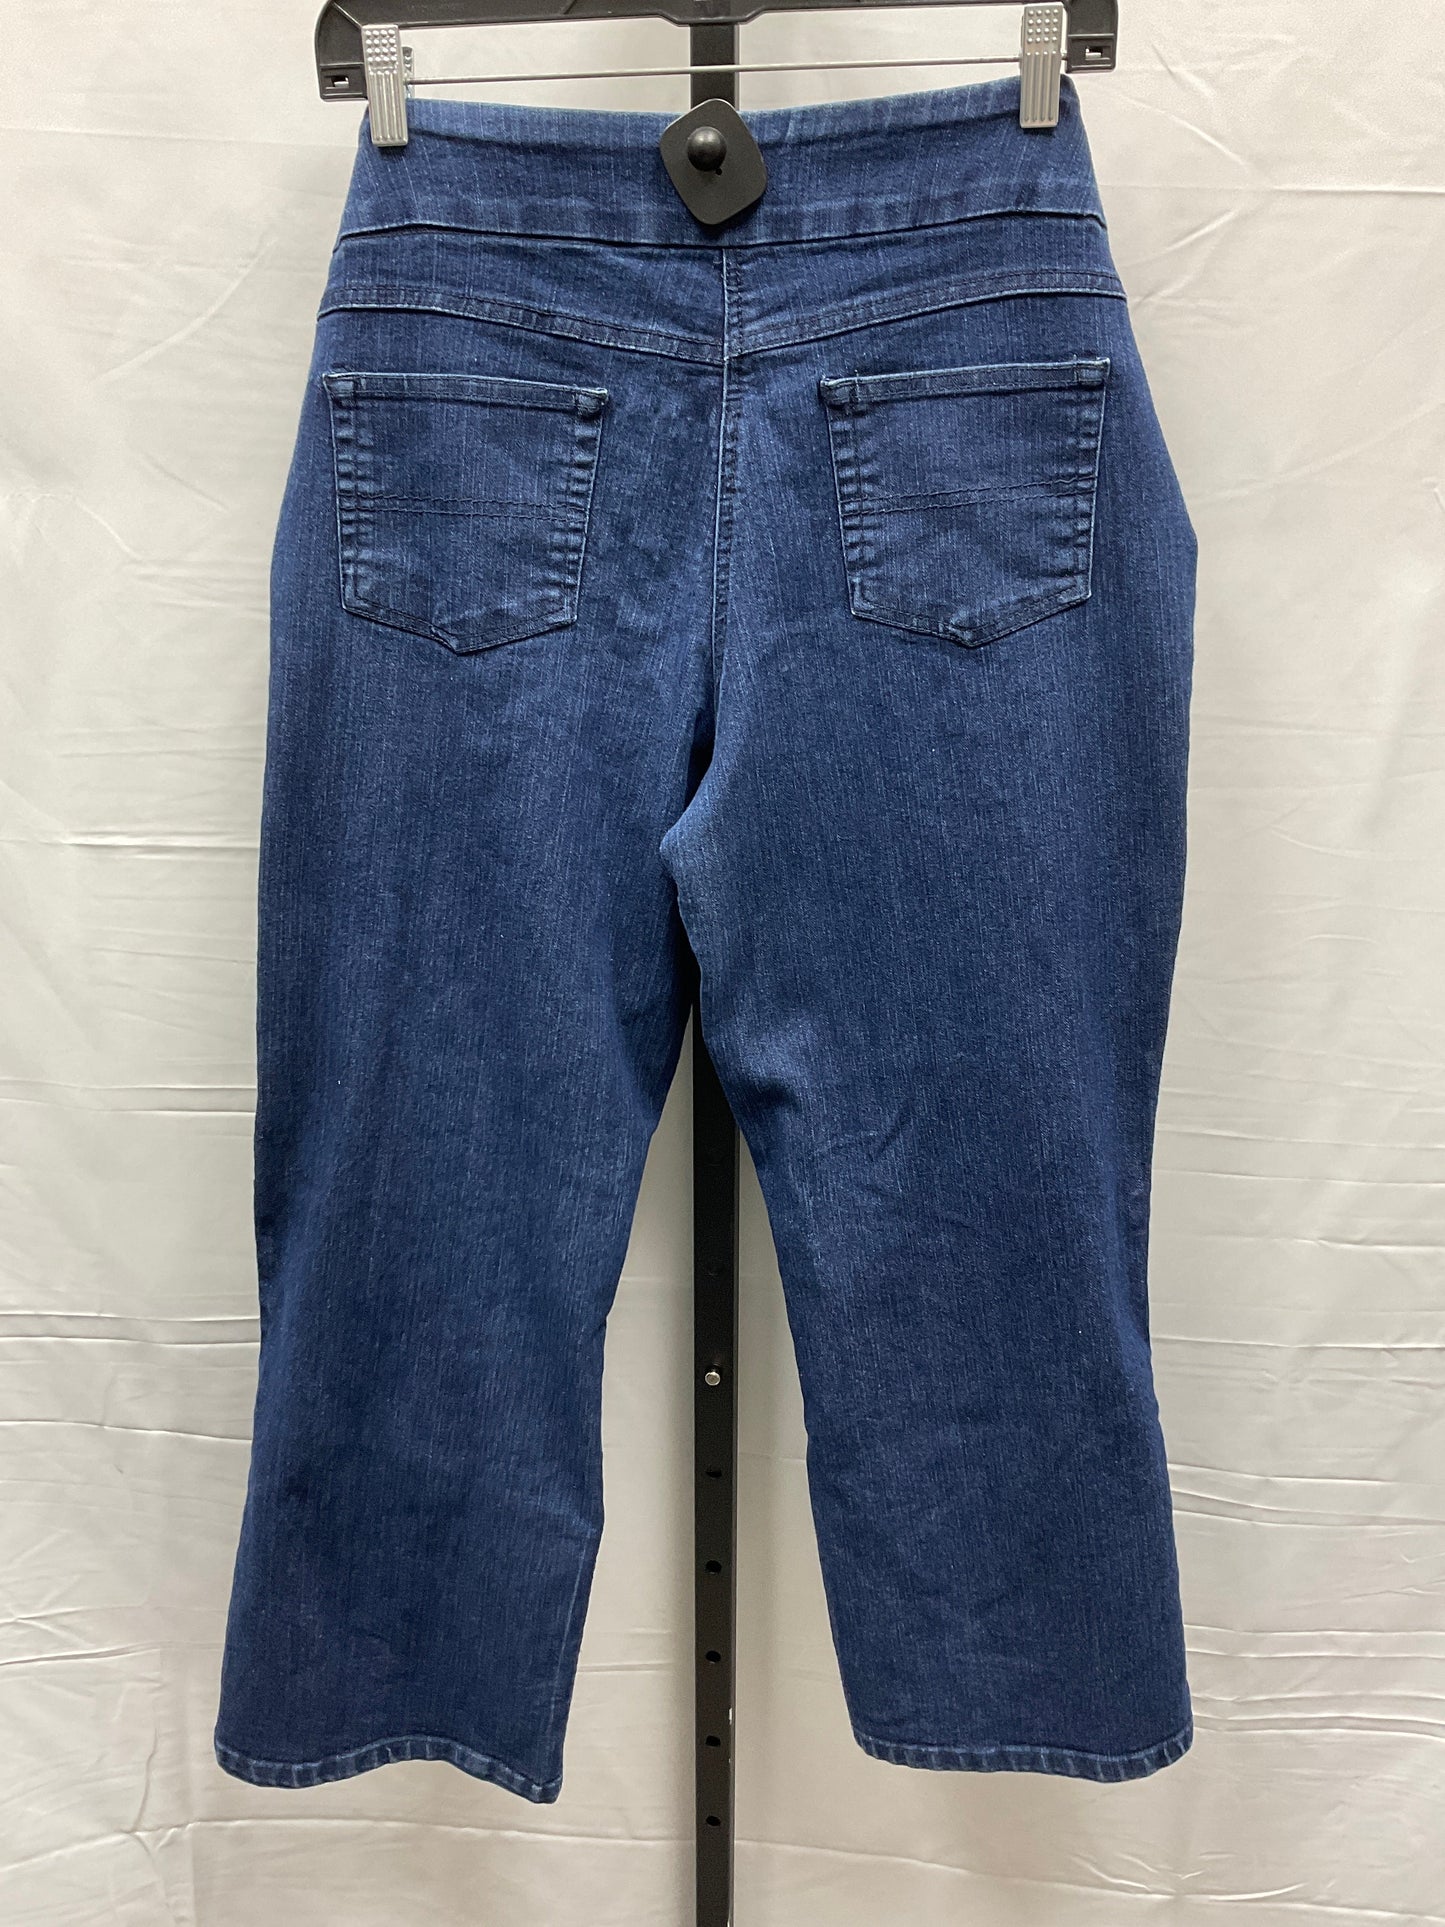 Jeans Jeggings By West Bound  Size: 16petite